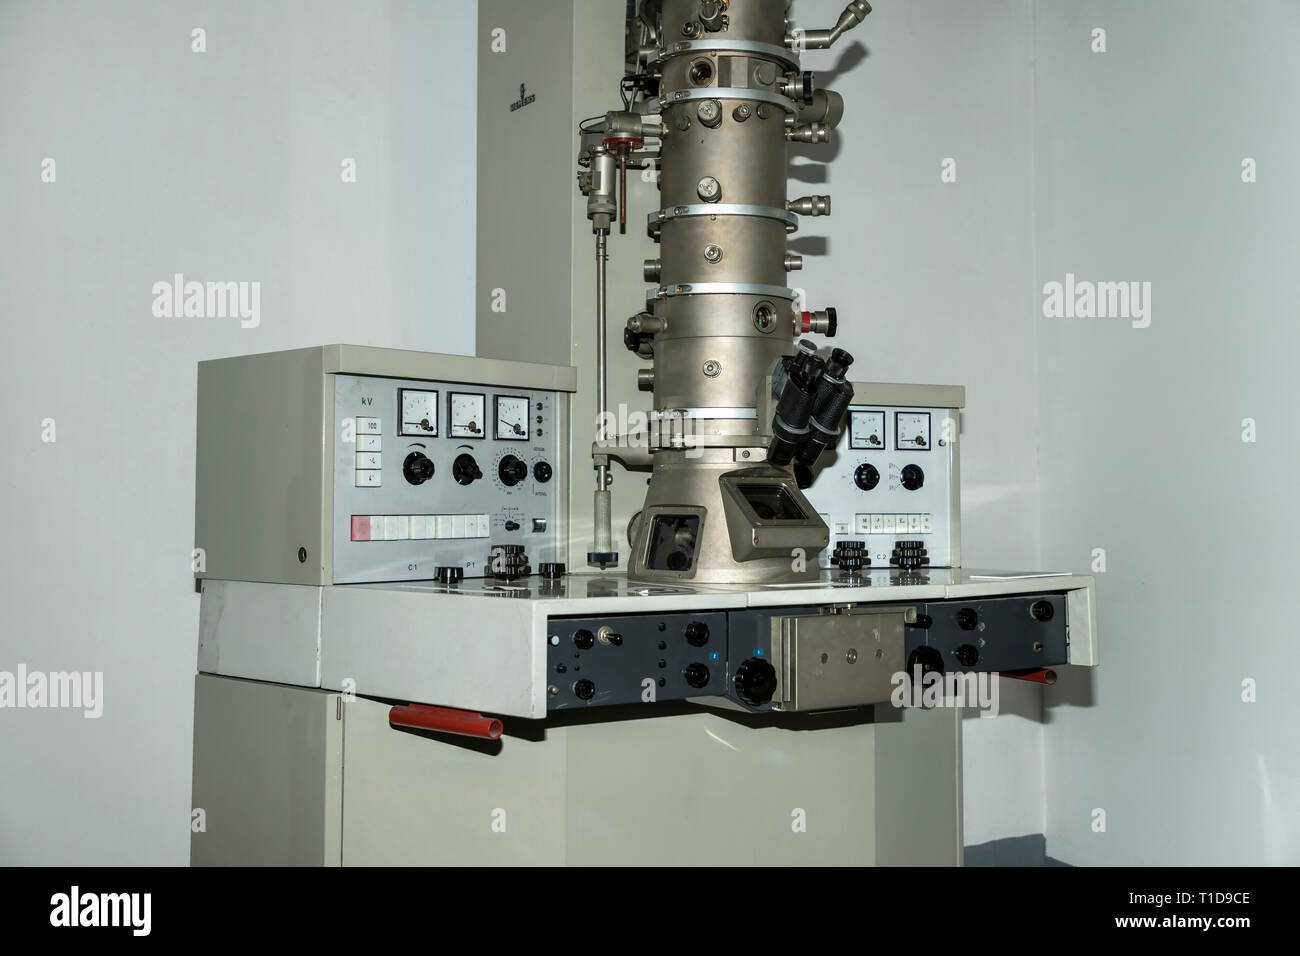 Belgrade, Serbia, March 2019 - Transmission Electron Microscope made by Siemens in 1970s exposed in the Museum of Science and Technology Stock Photo